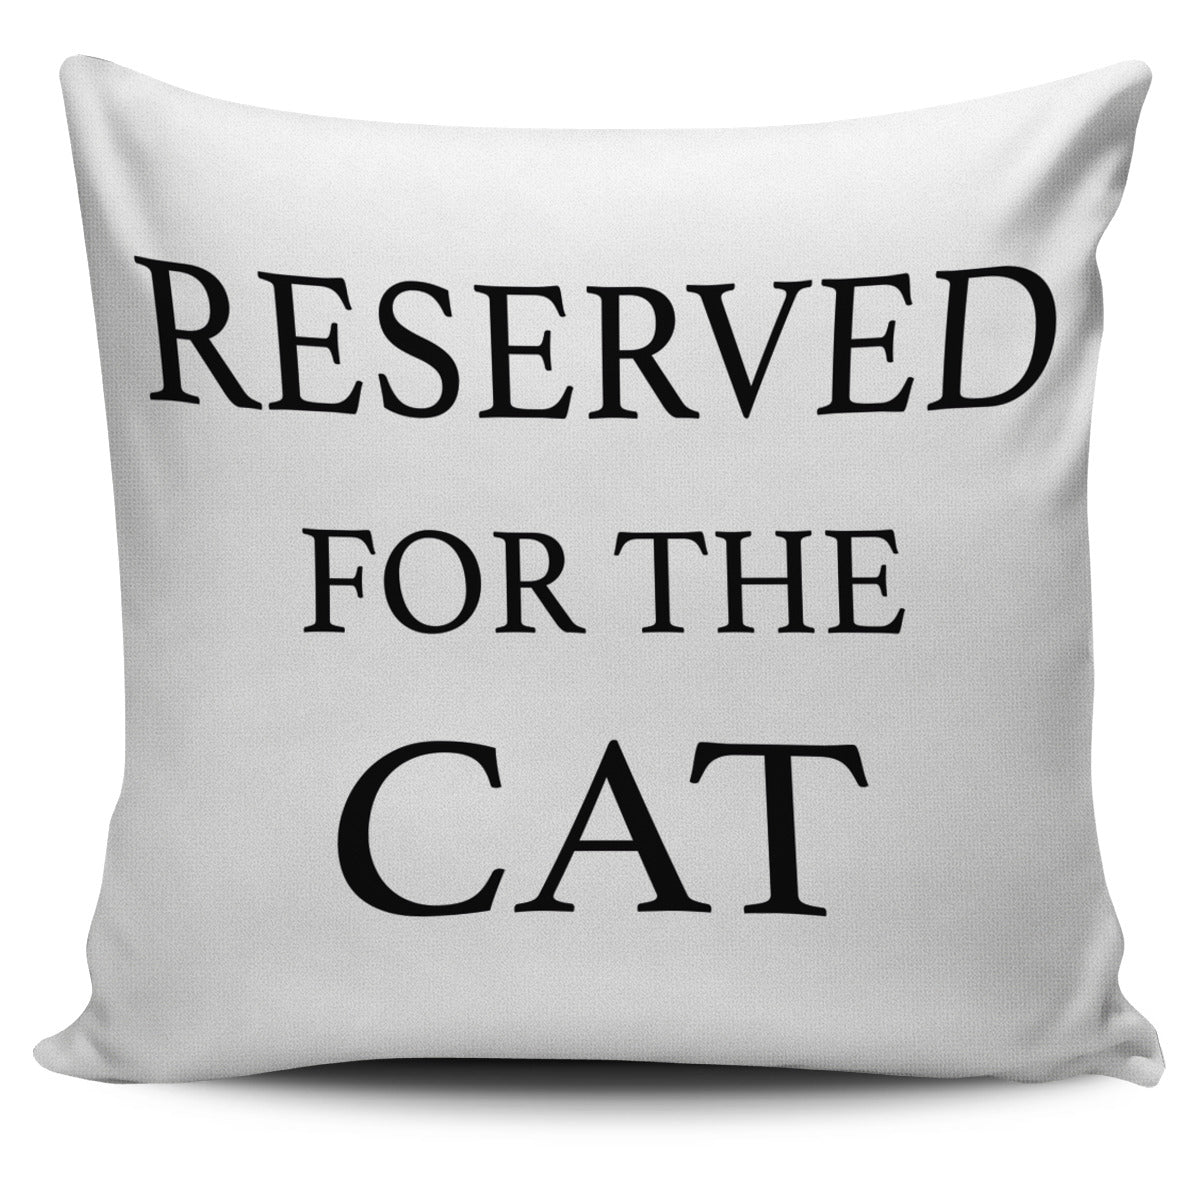 Pillow Cover - Reserved For The Cat